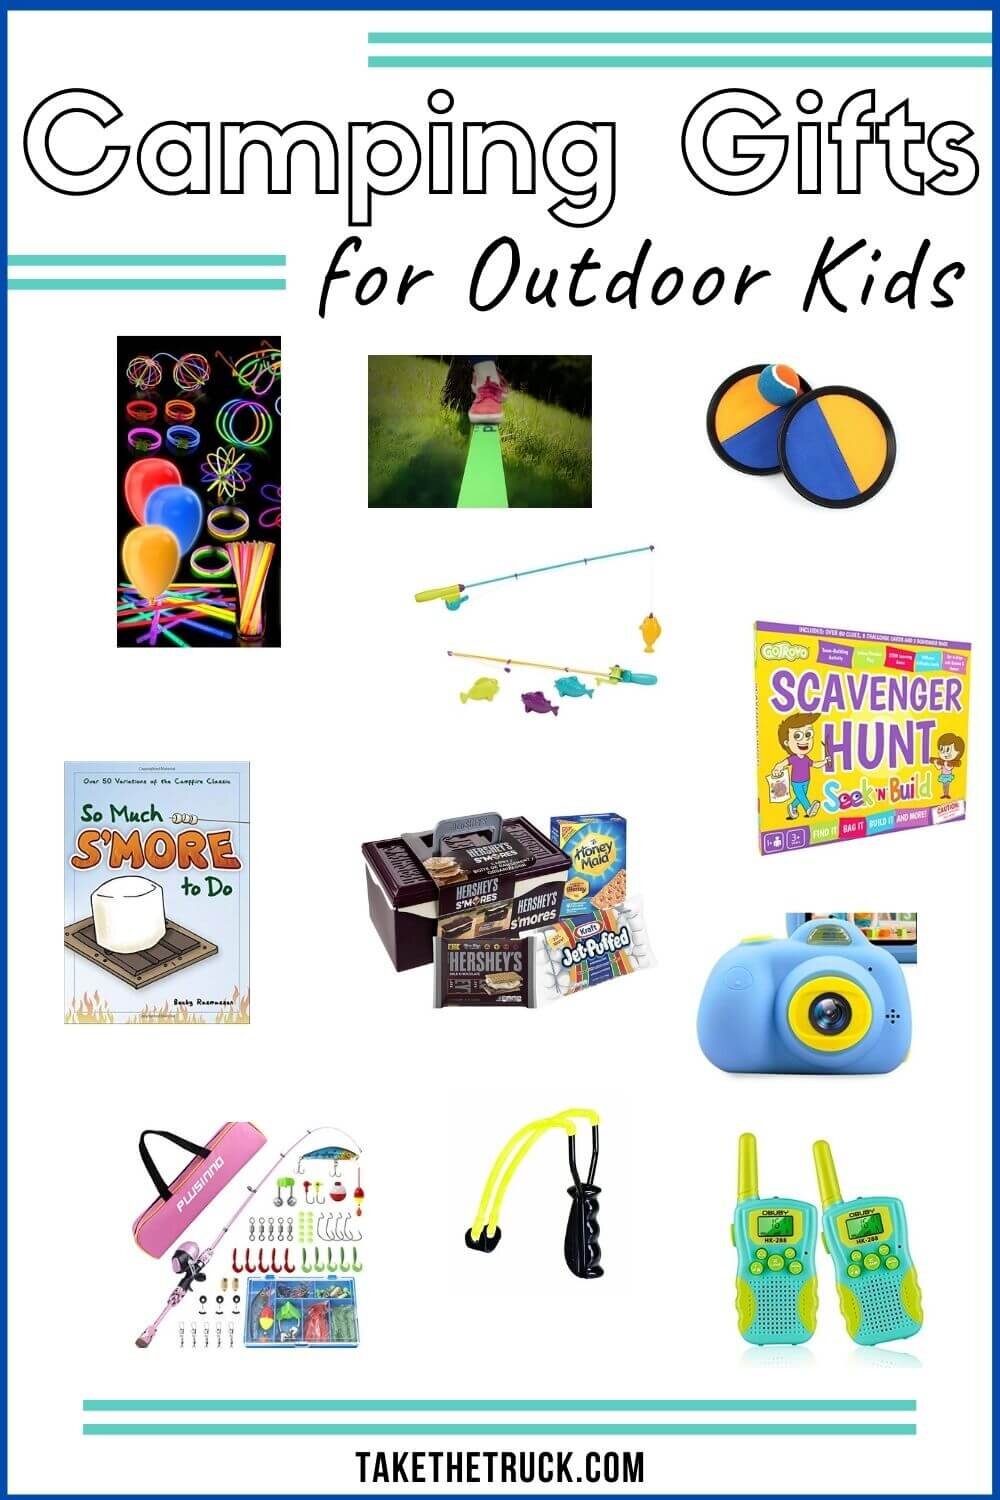 If you’re looking for camping birthday presents for kids, outdoor gifts for kids, or even camping Christmas presents for kids, read this! 17 fun gift ideas for outdoorsy children!